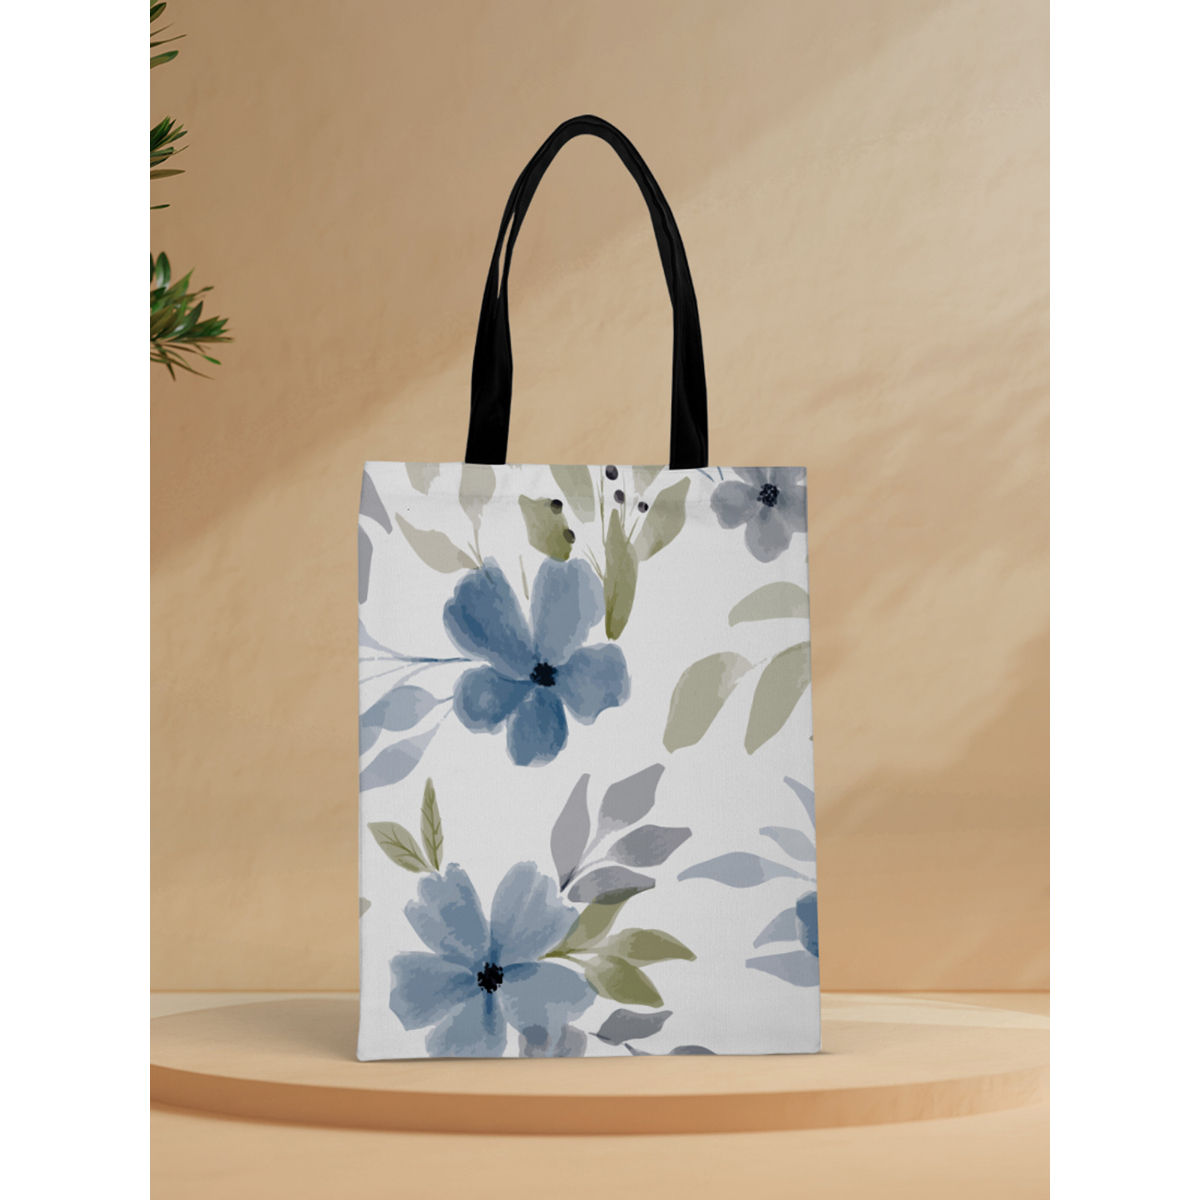 Customized Birds And Flowers Box Tote Bag - Crazy Corner